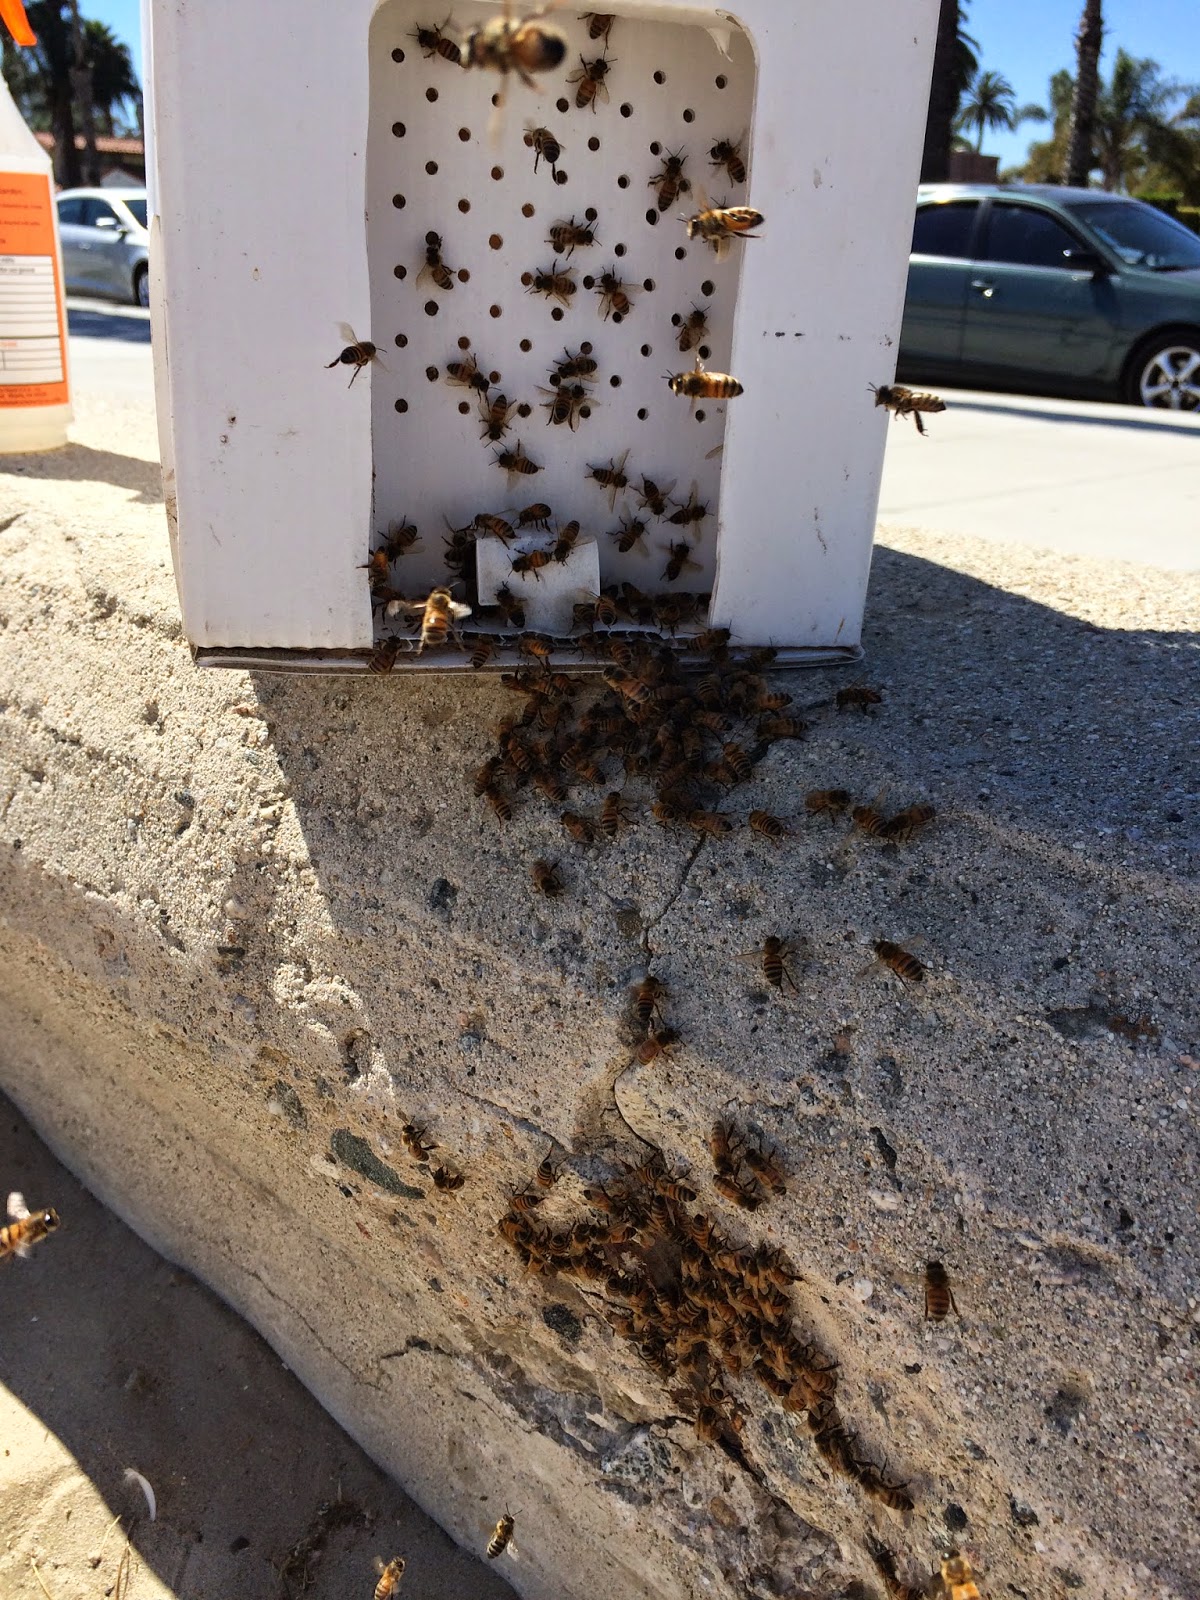 Bees at the Beach Rescue